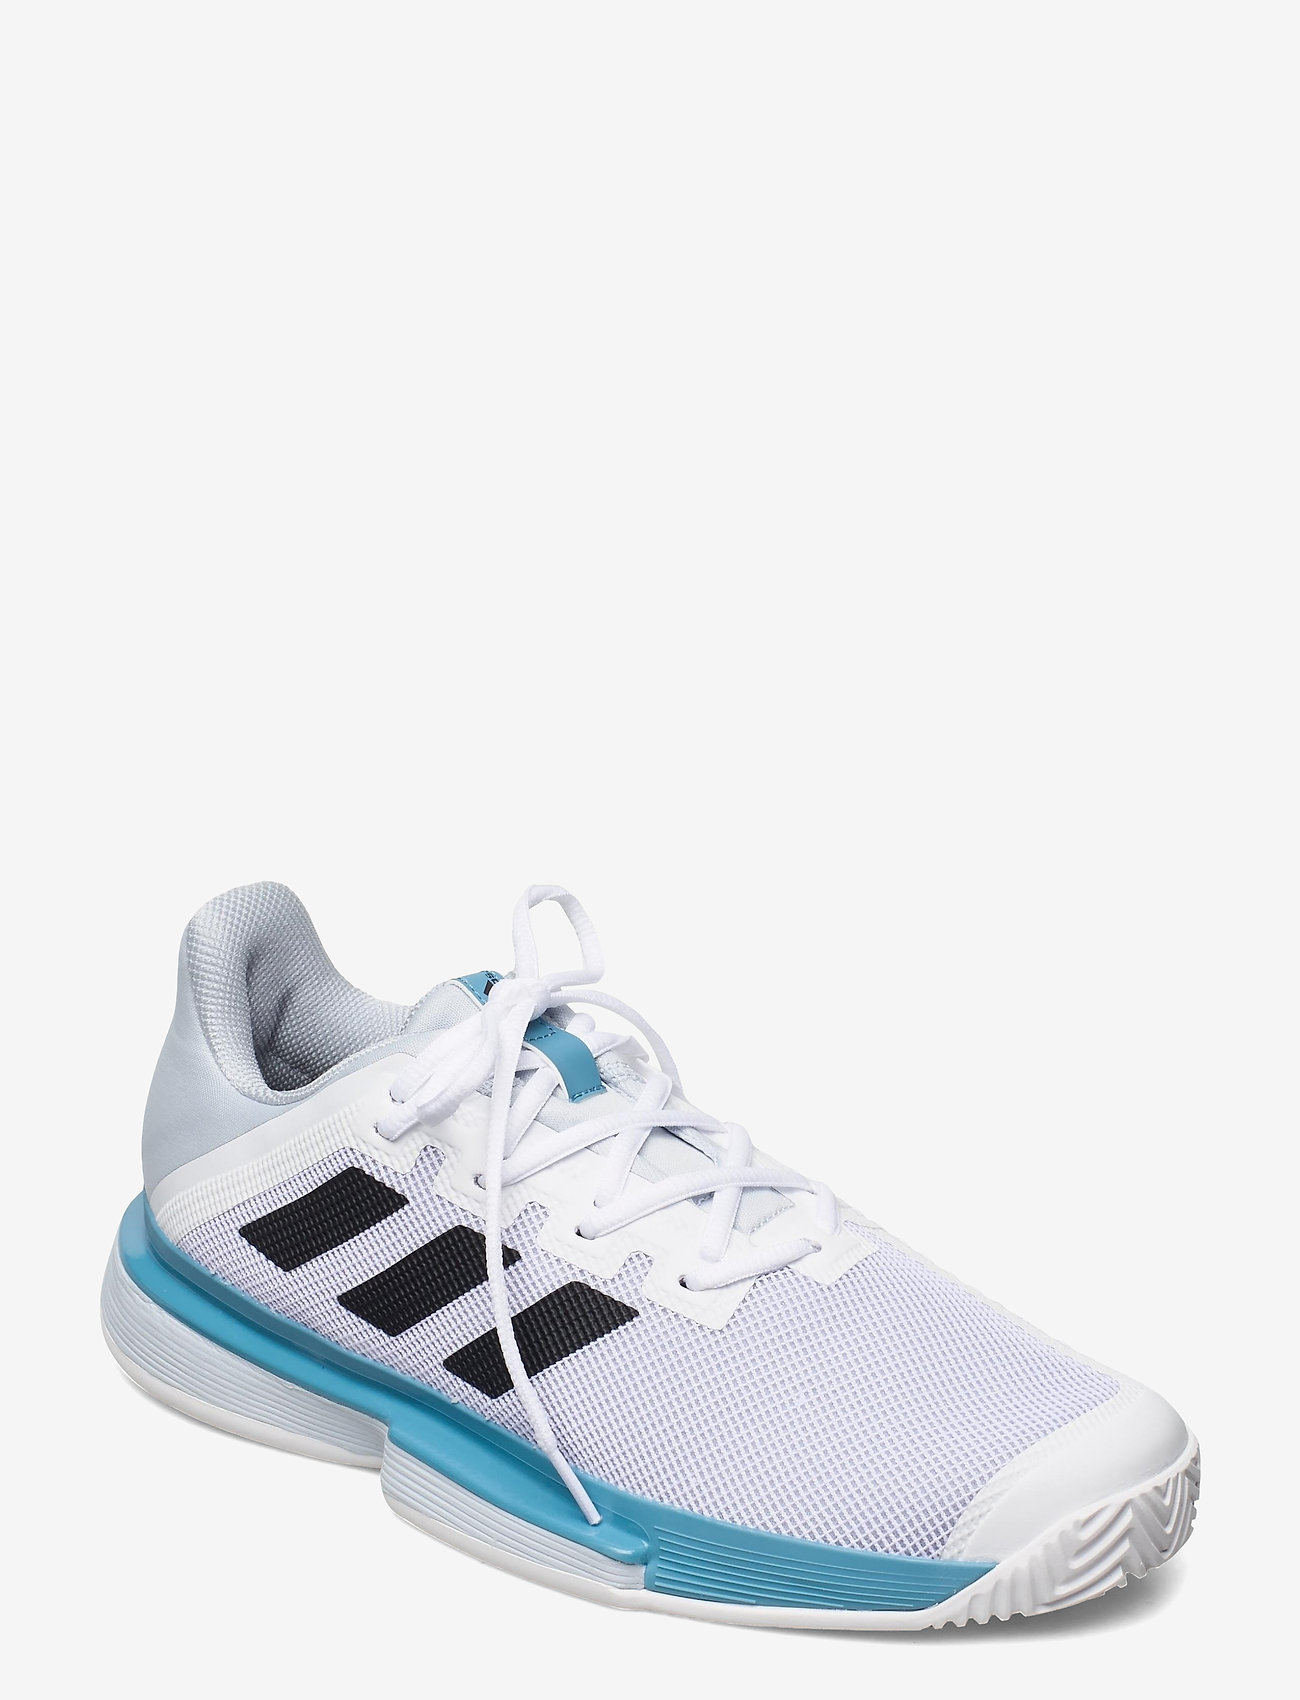 adidas solematch bounce